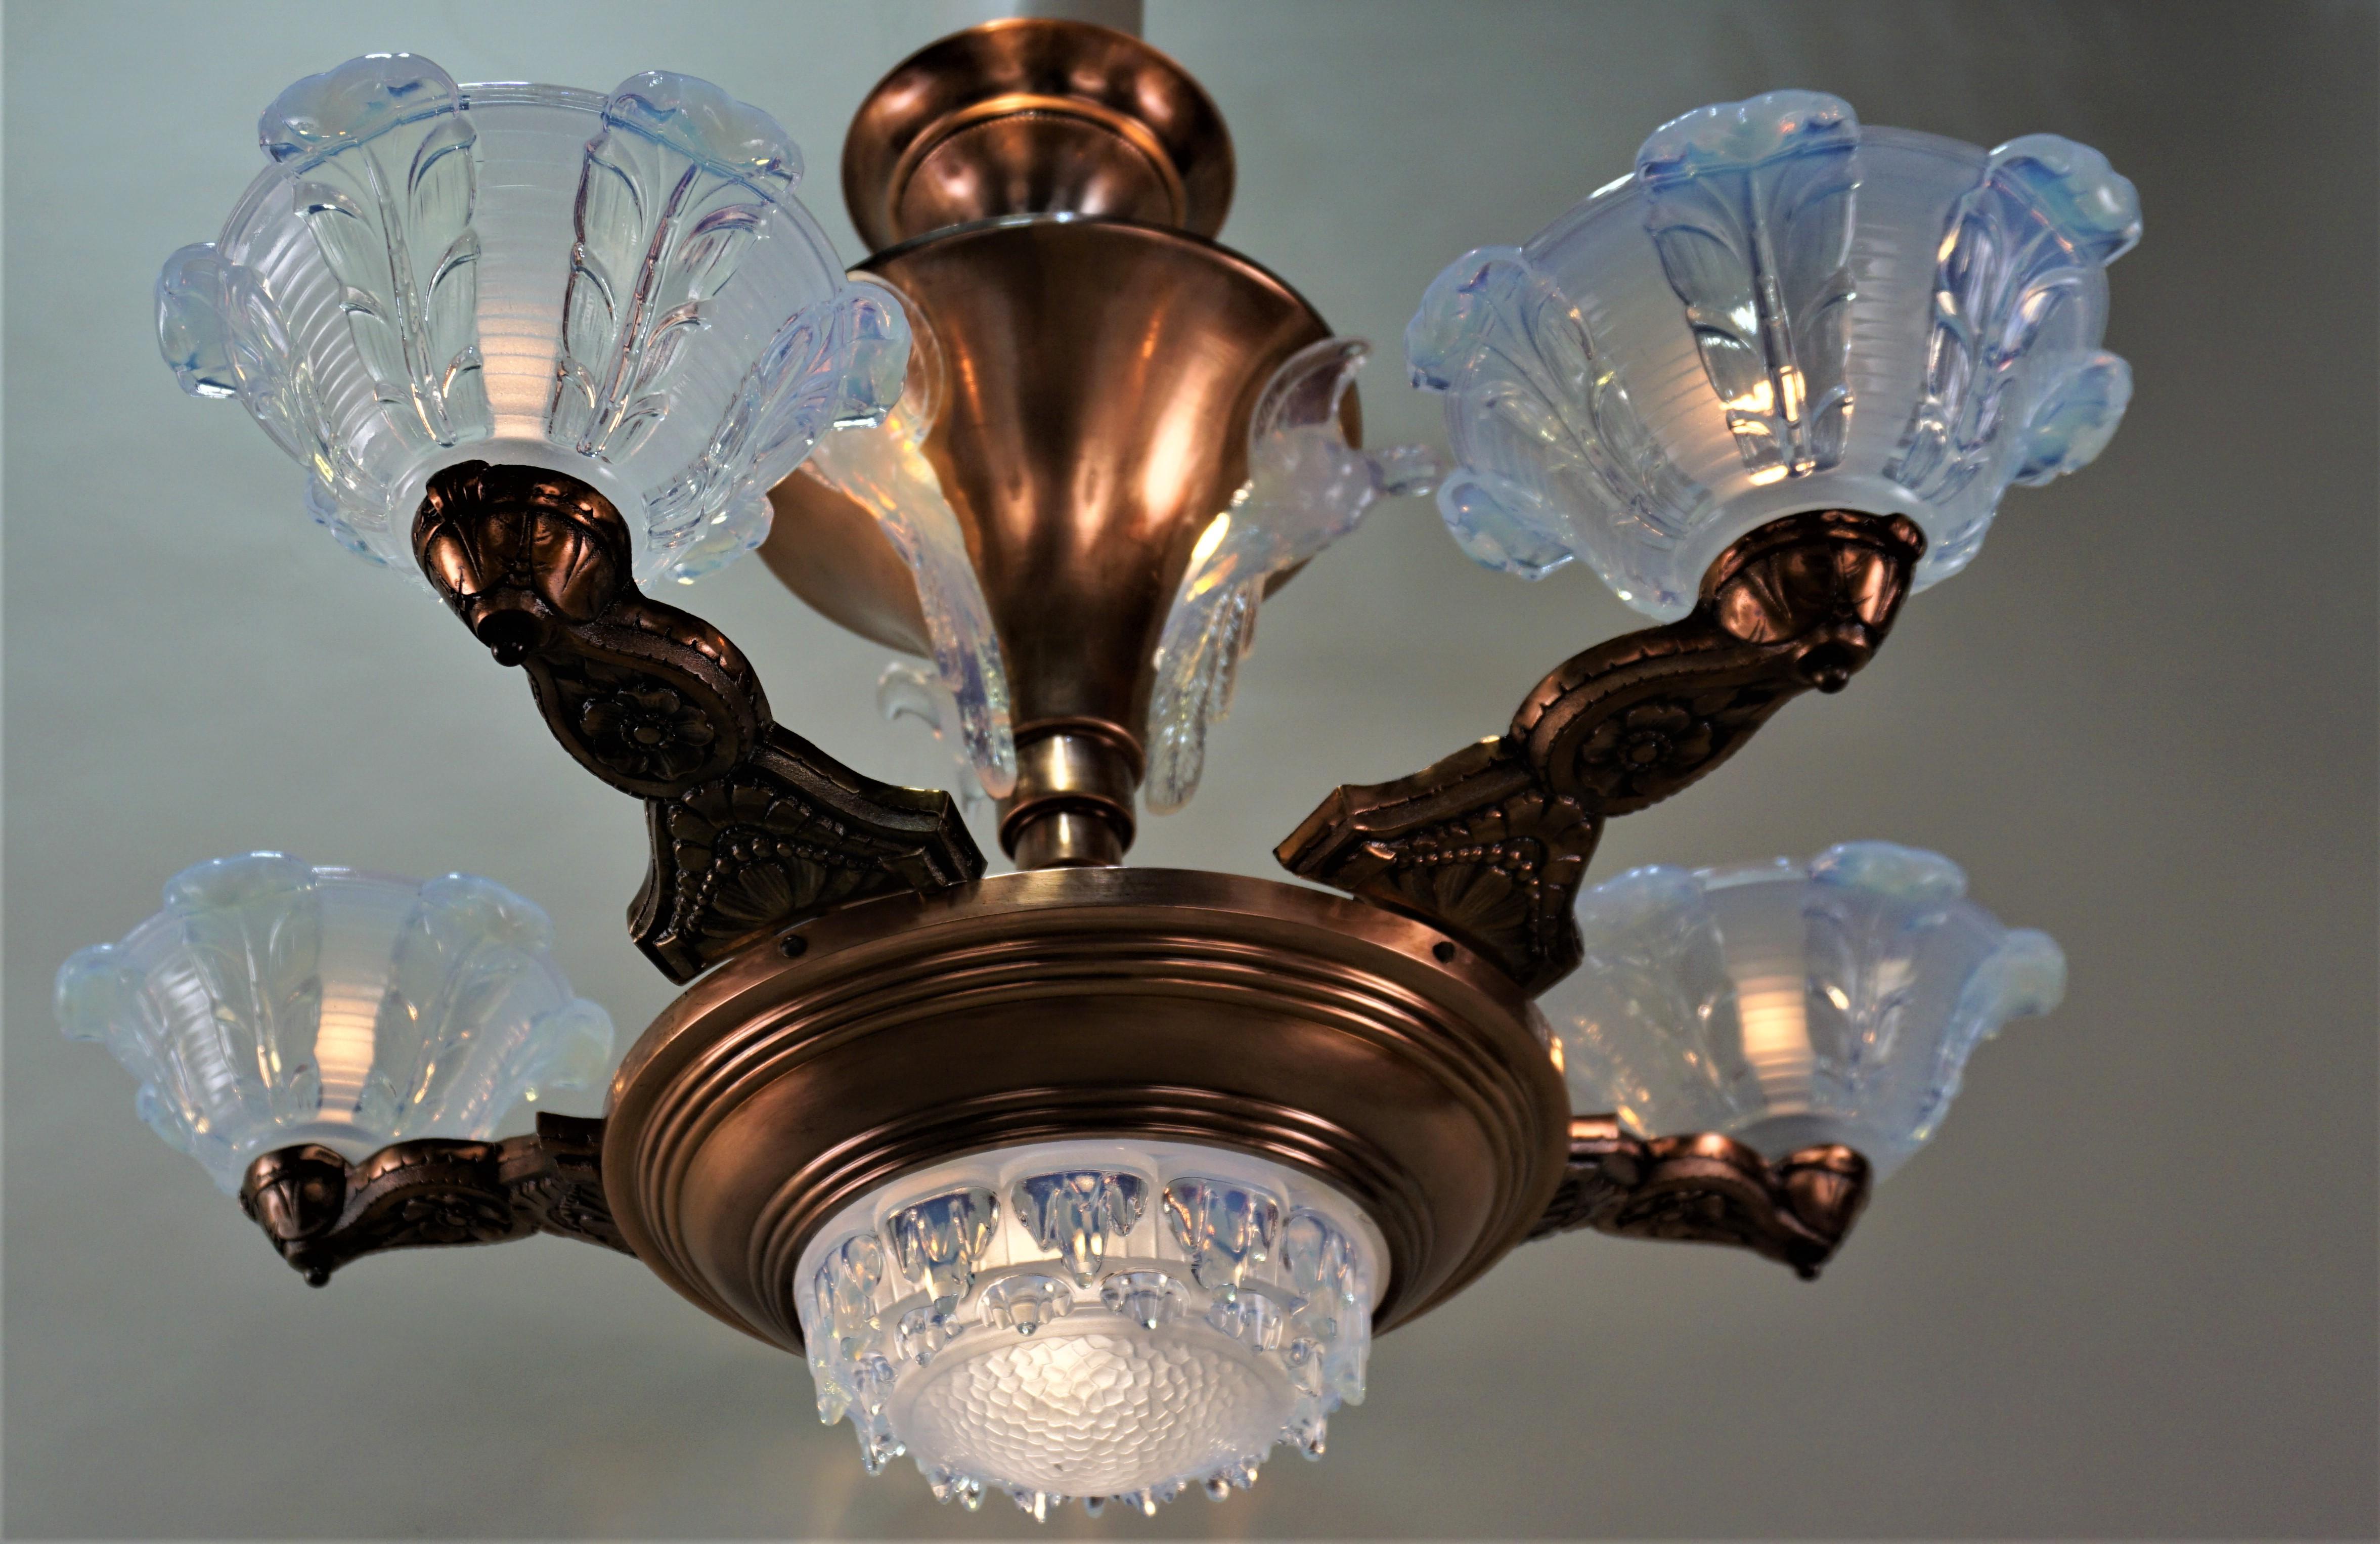 1930s feather design opaline glass shade and copper plate chandelier.